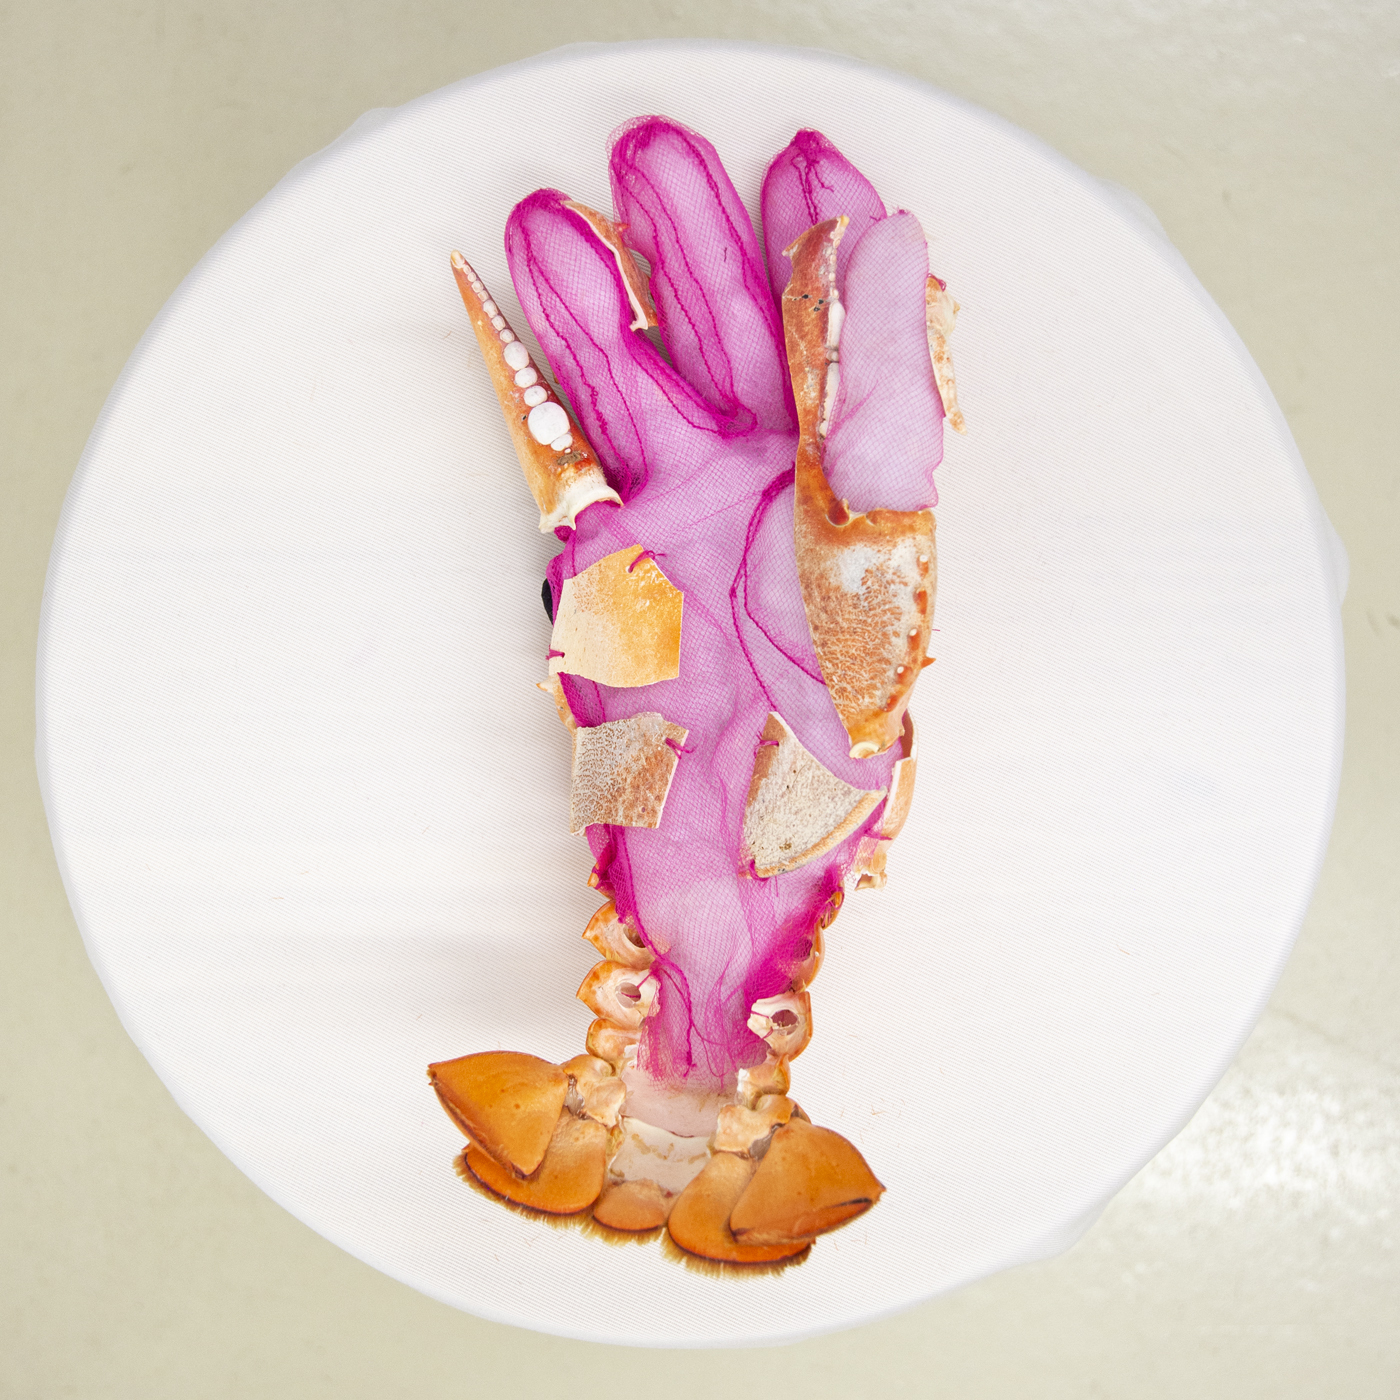 a pink tulle glove sits palm-up and white polyfill stuffing is visible. The glove is covered by lobster shells.